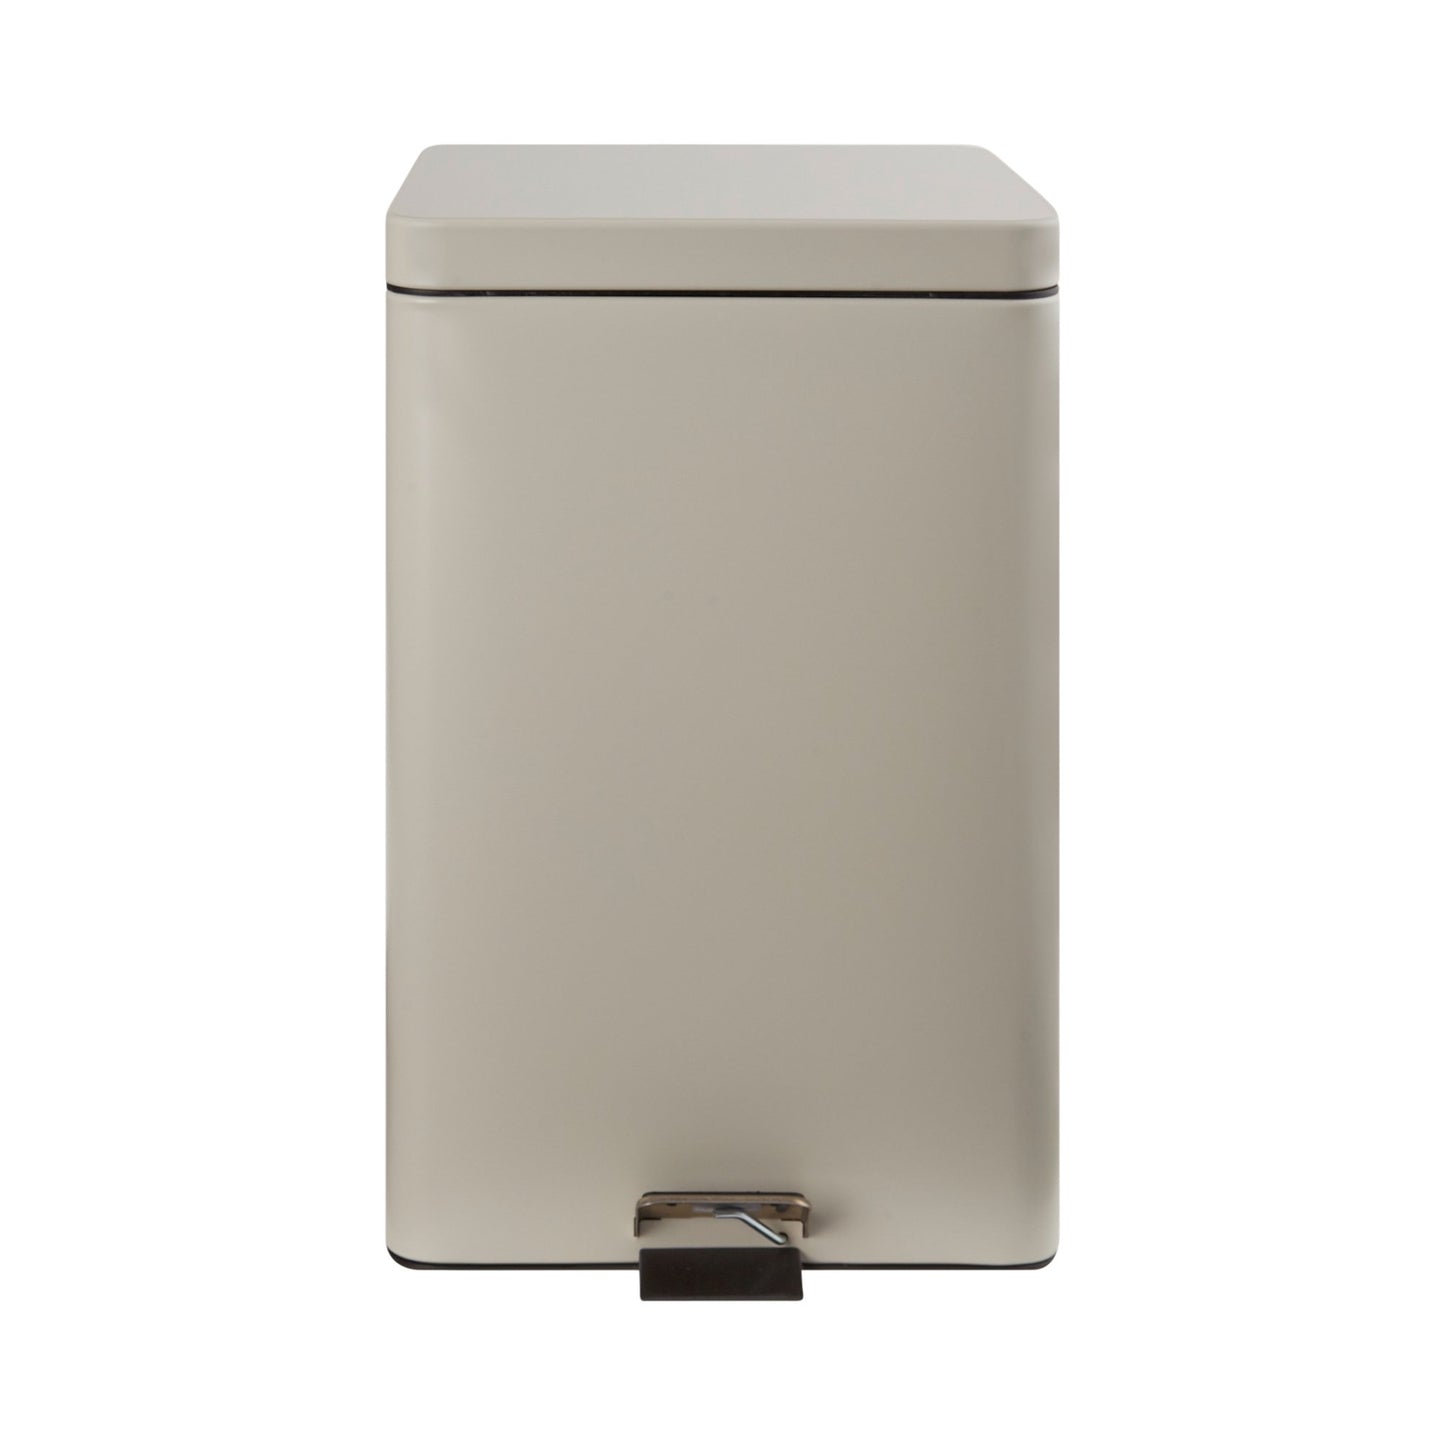 Mckesson Trash Can With Plastic Liner, Square, Steel, Step-On, 32 Qt, Beige, Sold As 1/Each Mckesson 81-35268